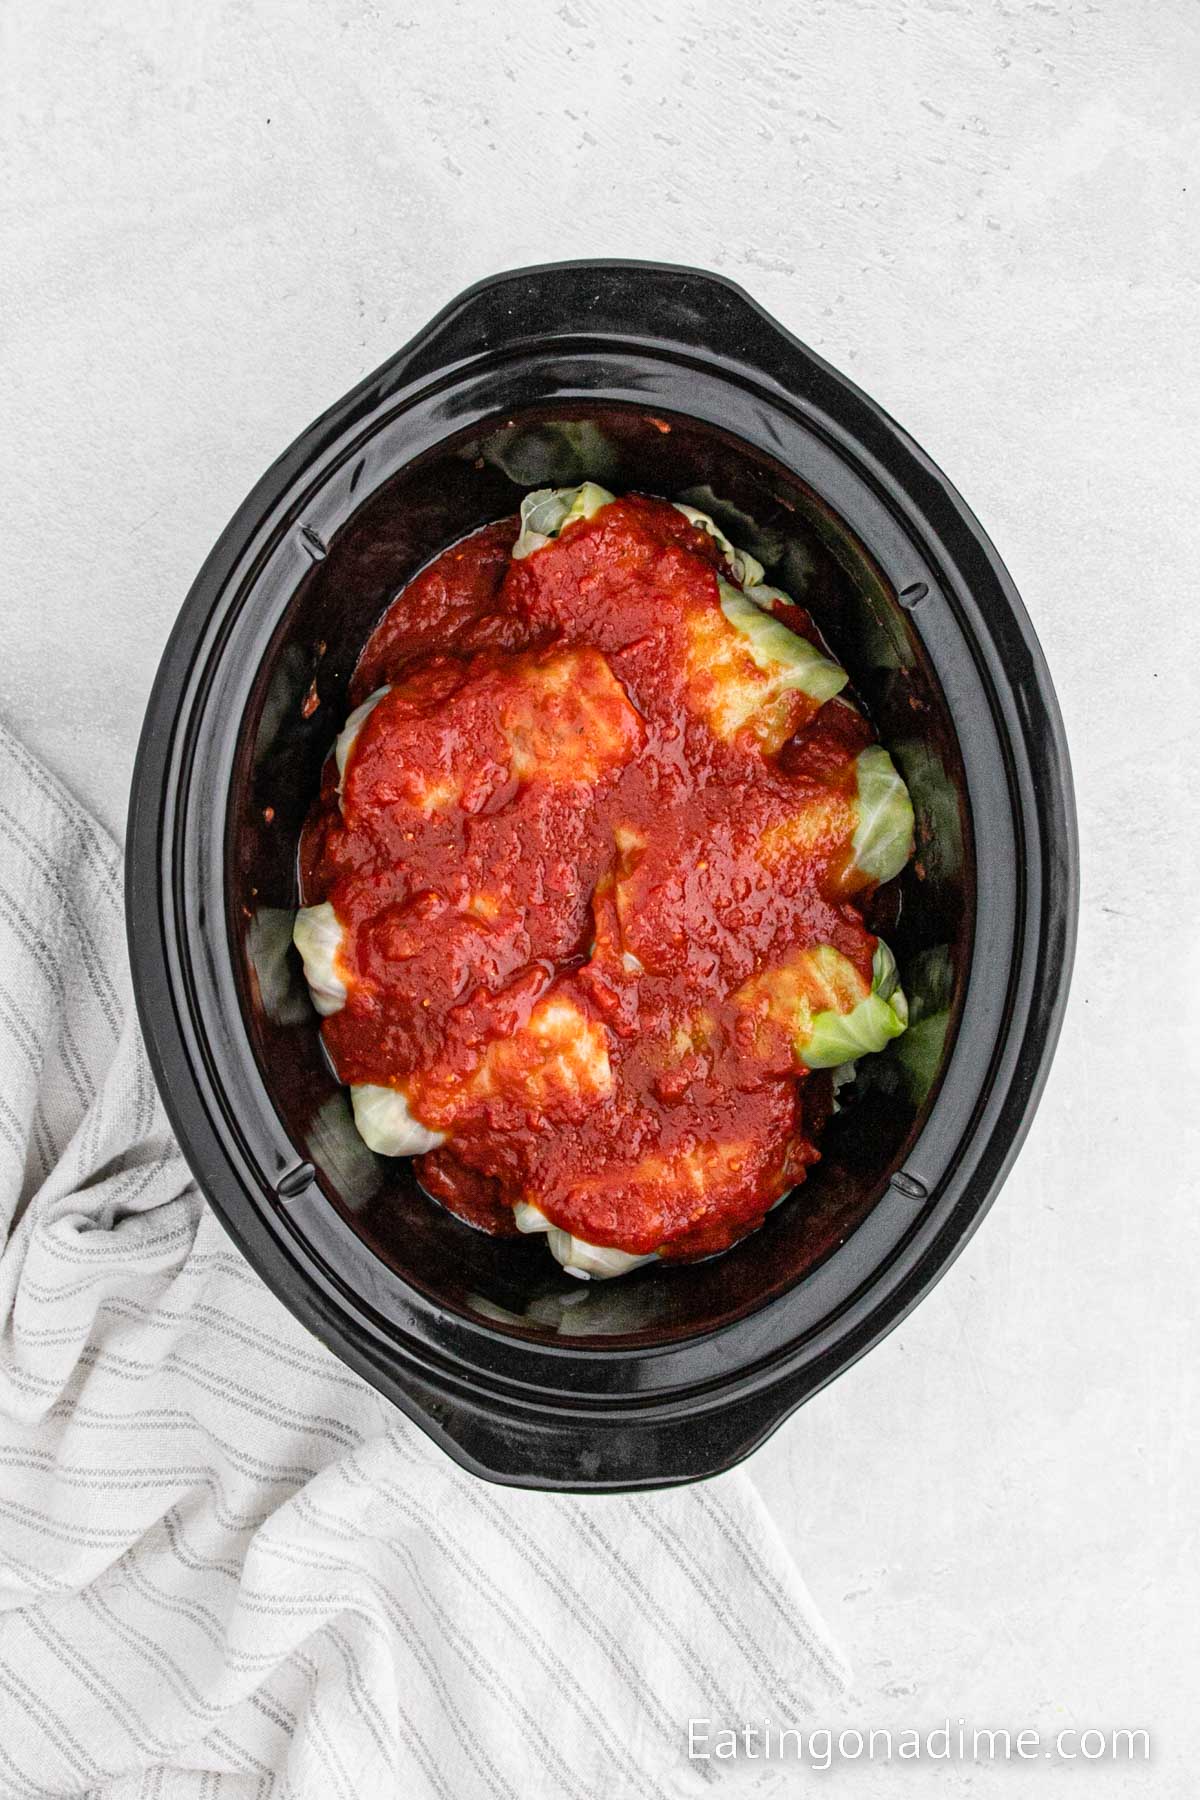 Layering the cabbage rolls in a slow cooker